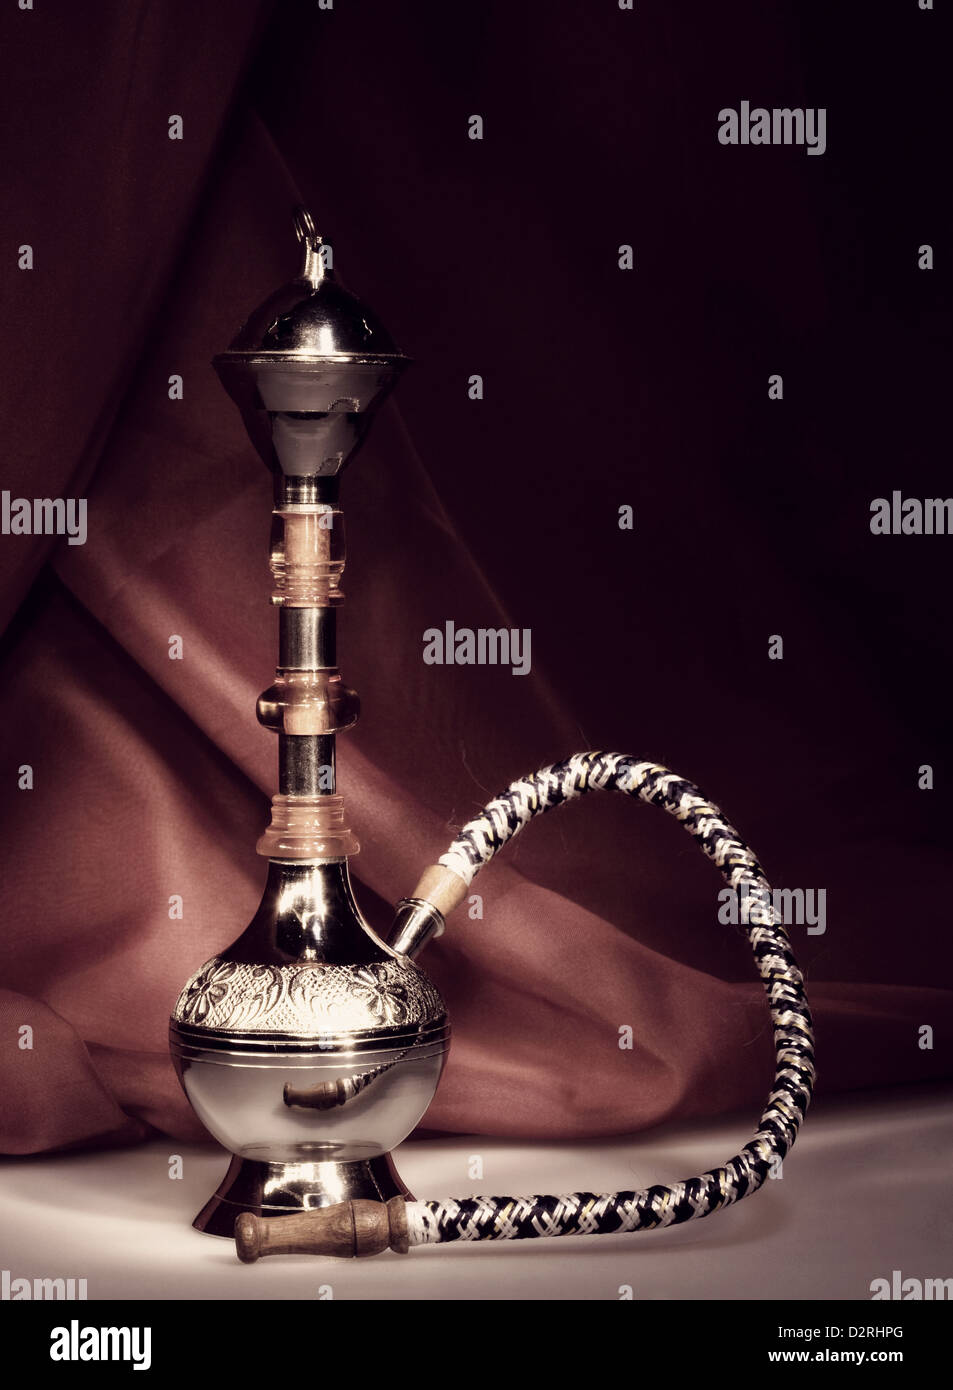 arabian hookah with abstract light. light pen used whilst shot Stock Photo